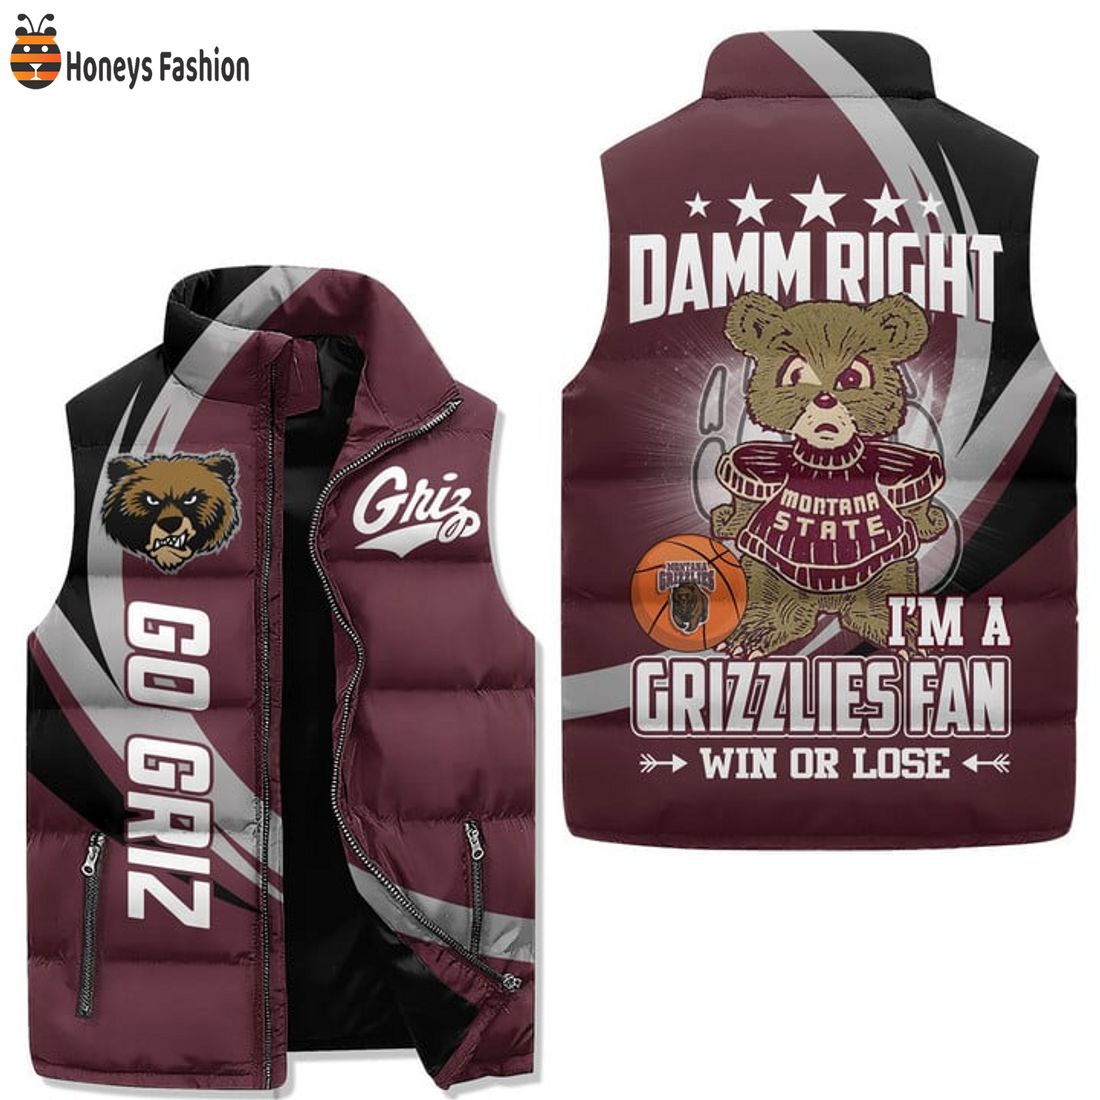 TRENDING Montana Grizzlies Damm Right Win Or Lose Puffer Sleeveless Jacket